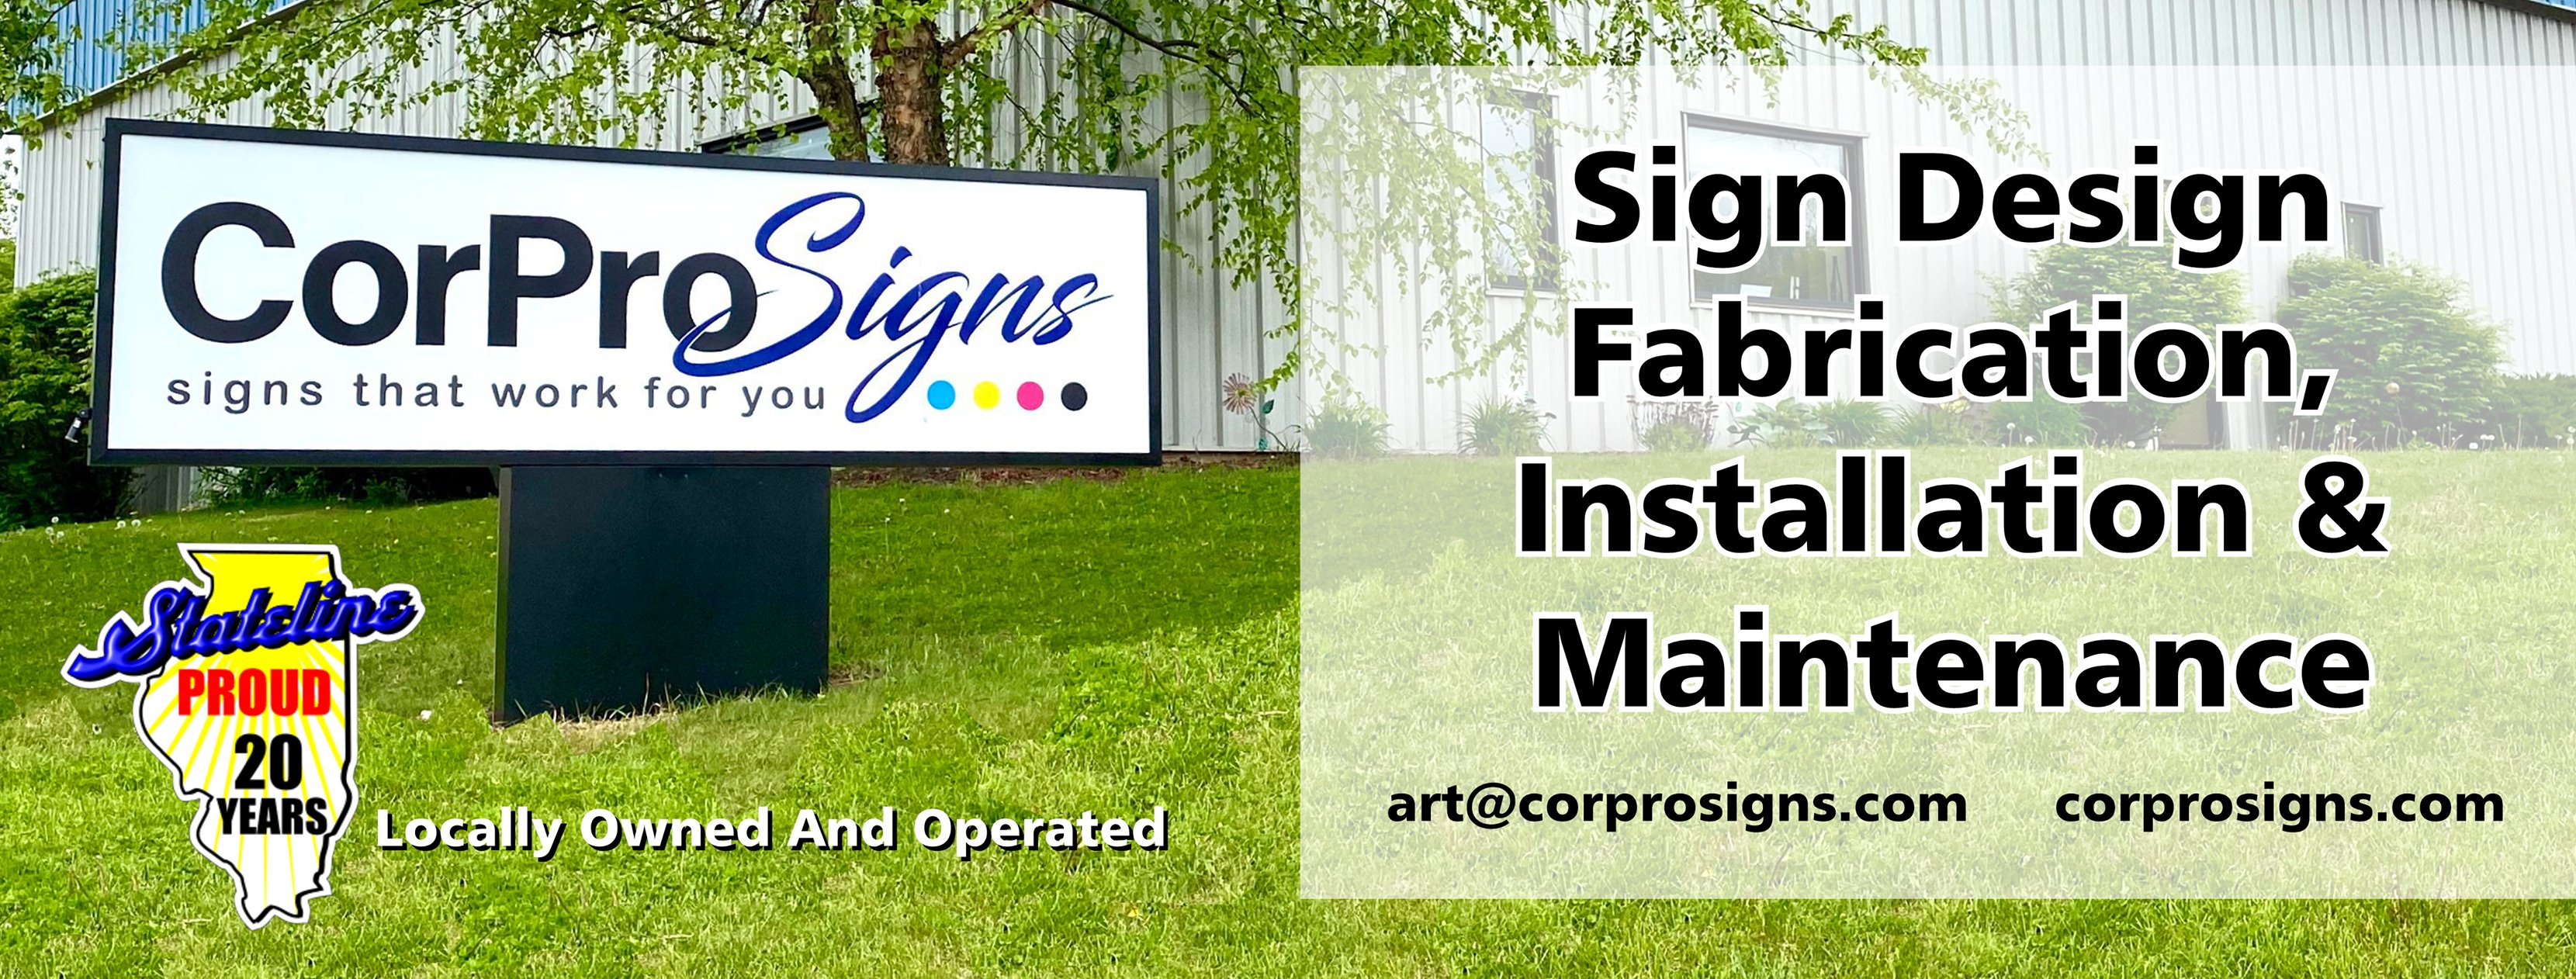 sign Design
Fabrication,
Installation &
Maintenance

art@corprosigns.com corprosigns.com

Cor ProS js

signs that work for you